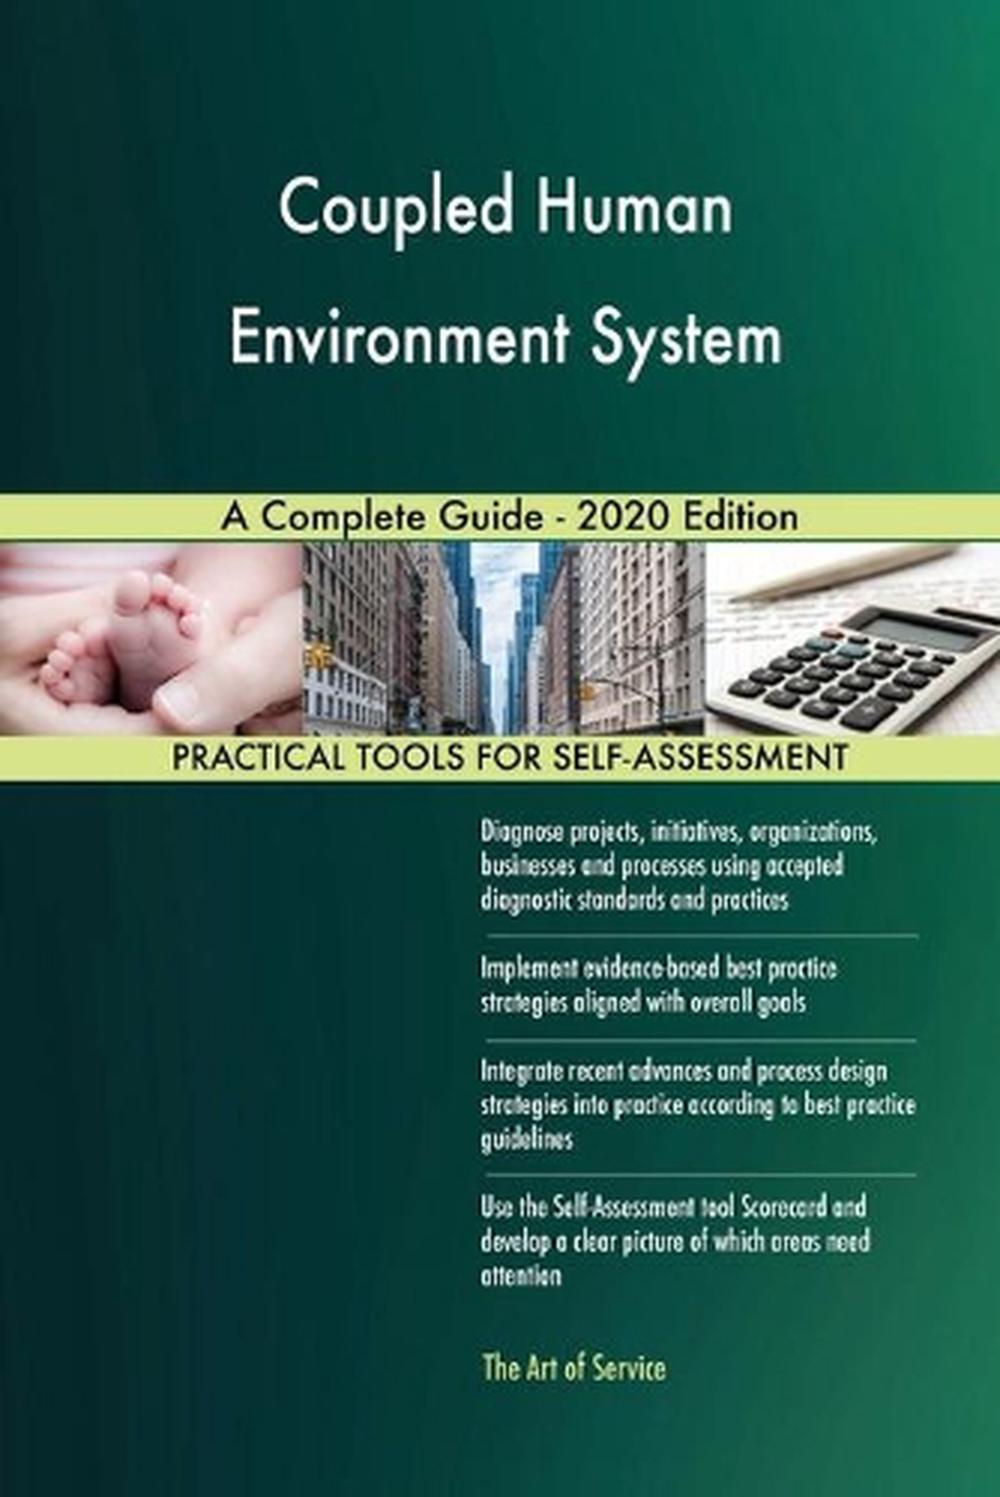 Coupled Human Environment System a Complete Guide 2020 Edition by